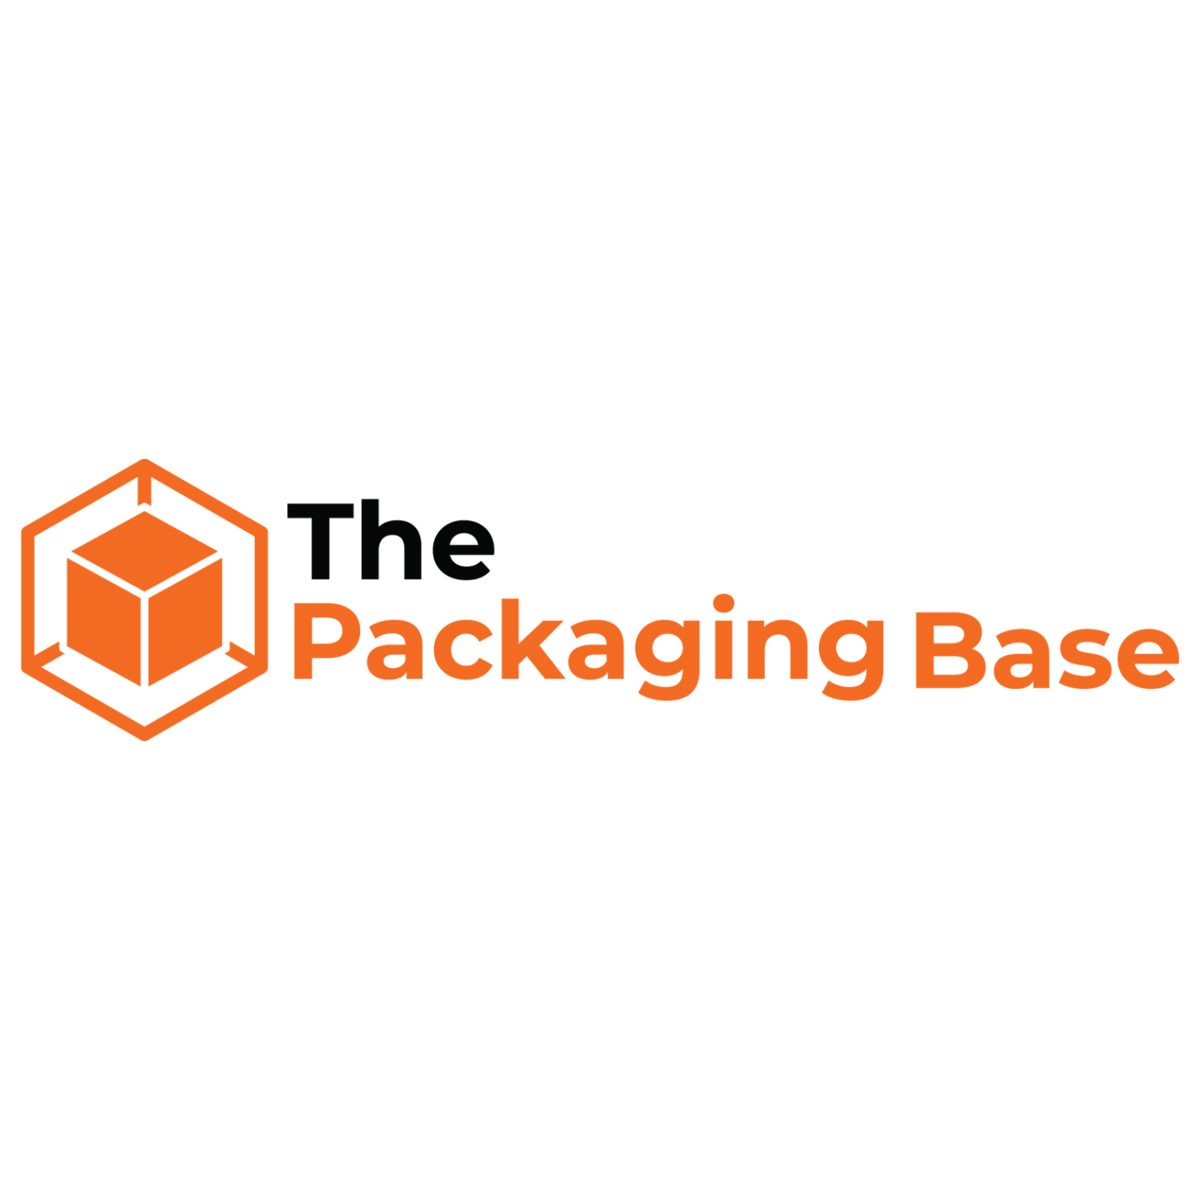 The Packaging Base